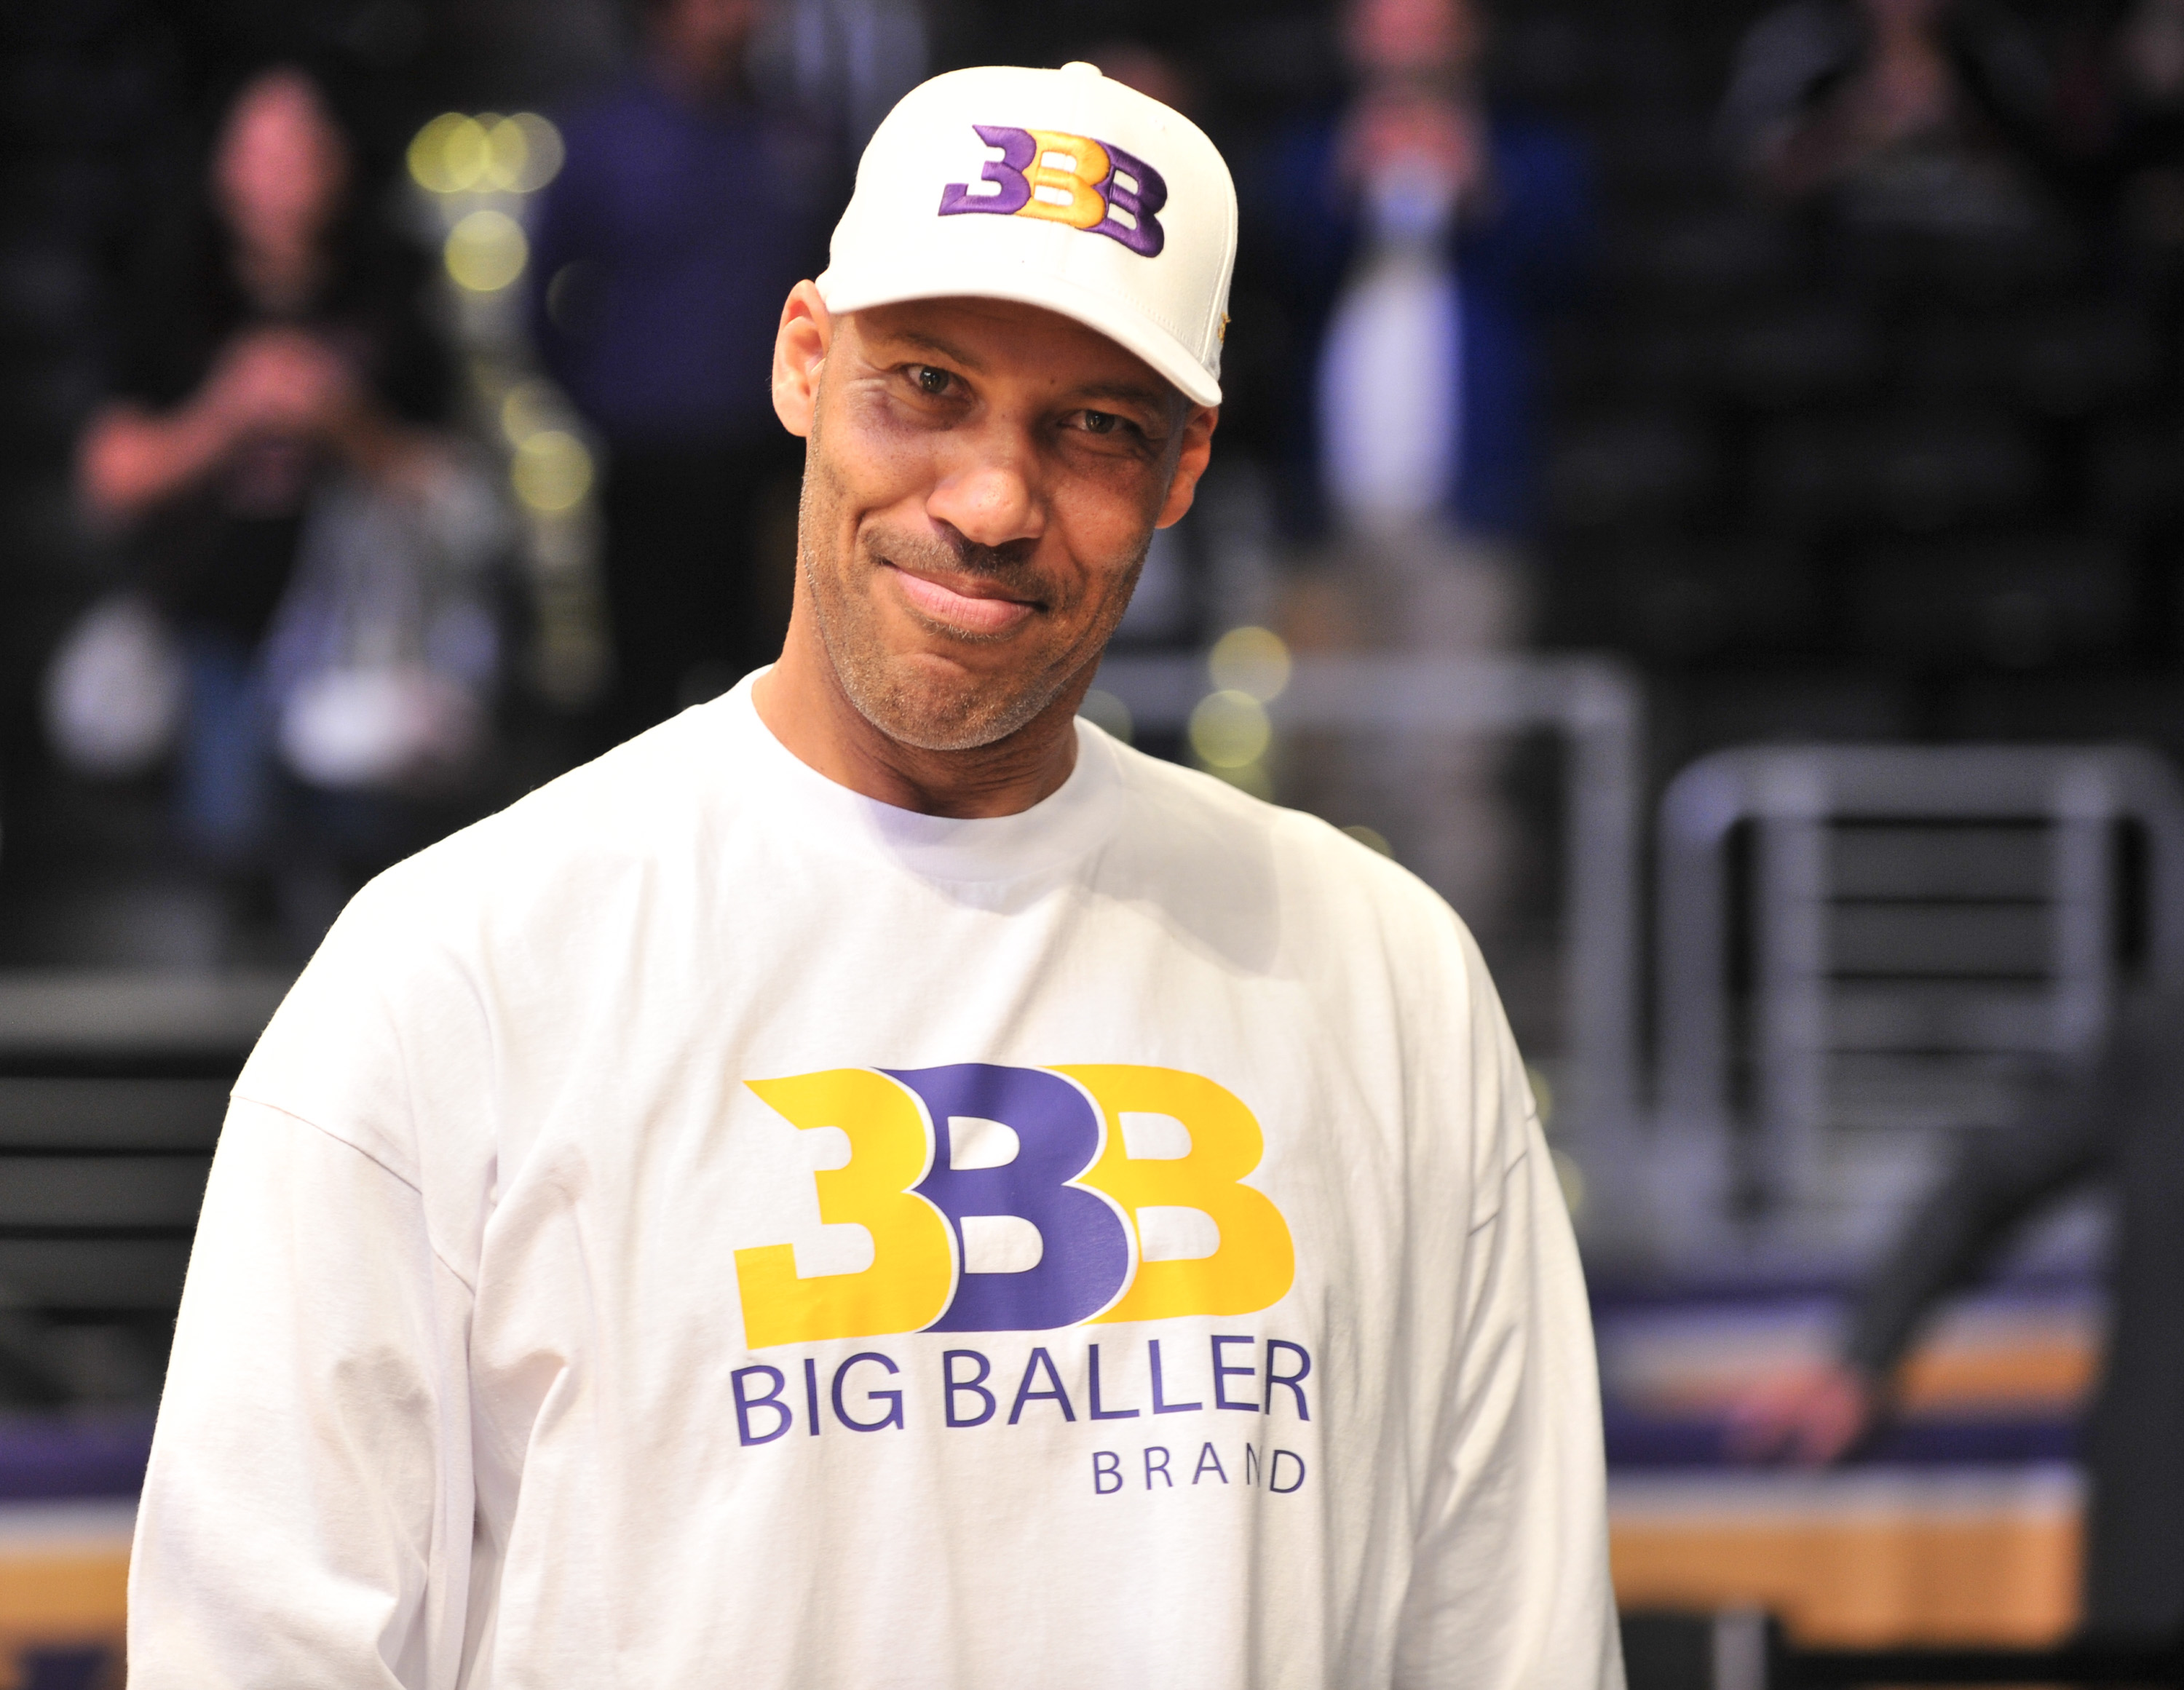 Lavar Ball Gives A Tour Of His Big Baller Brand Mansion On